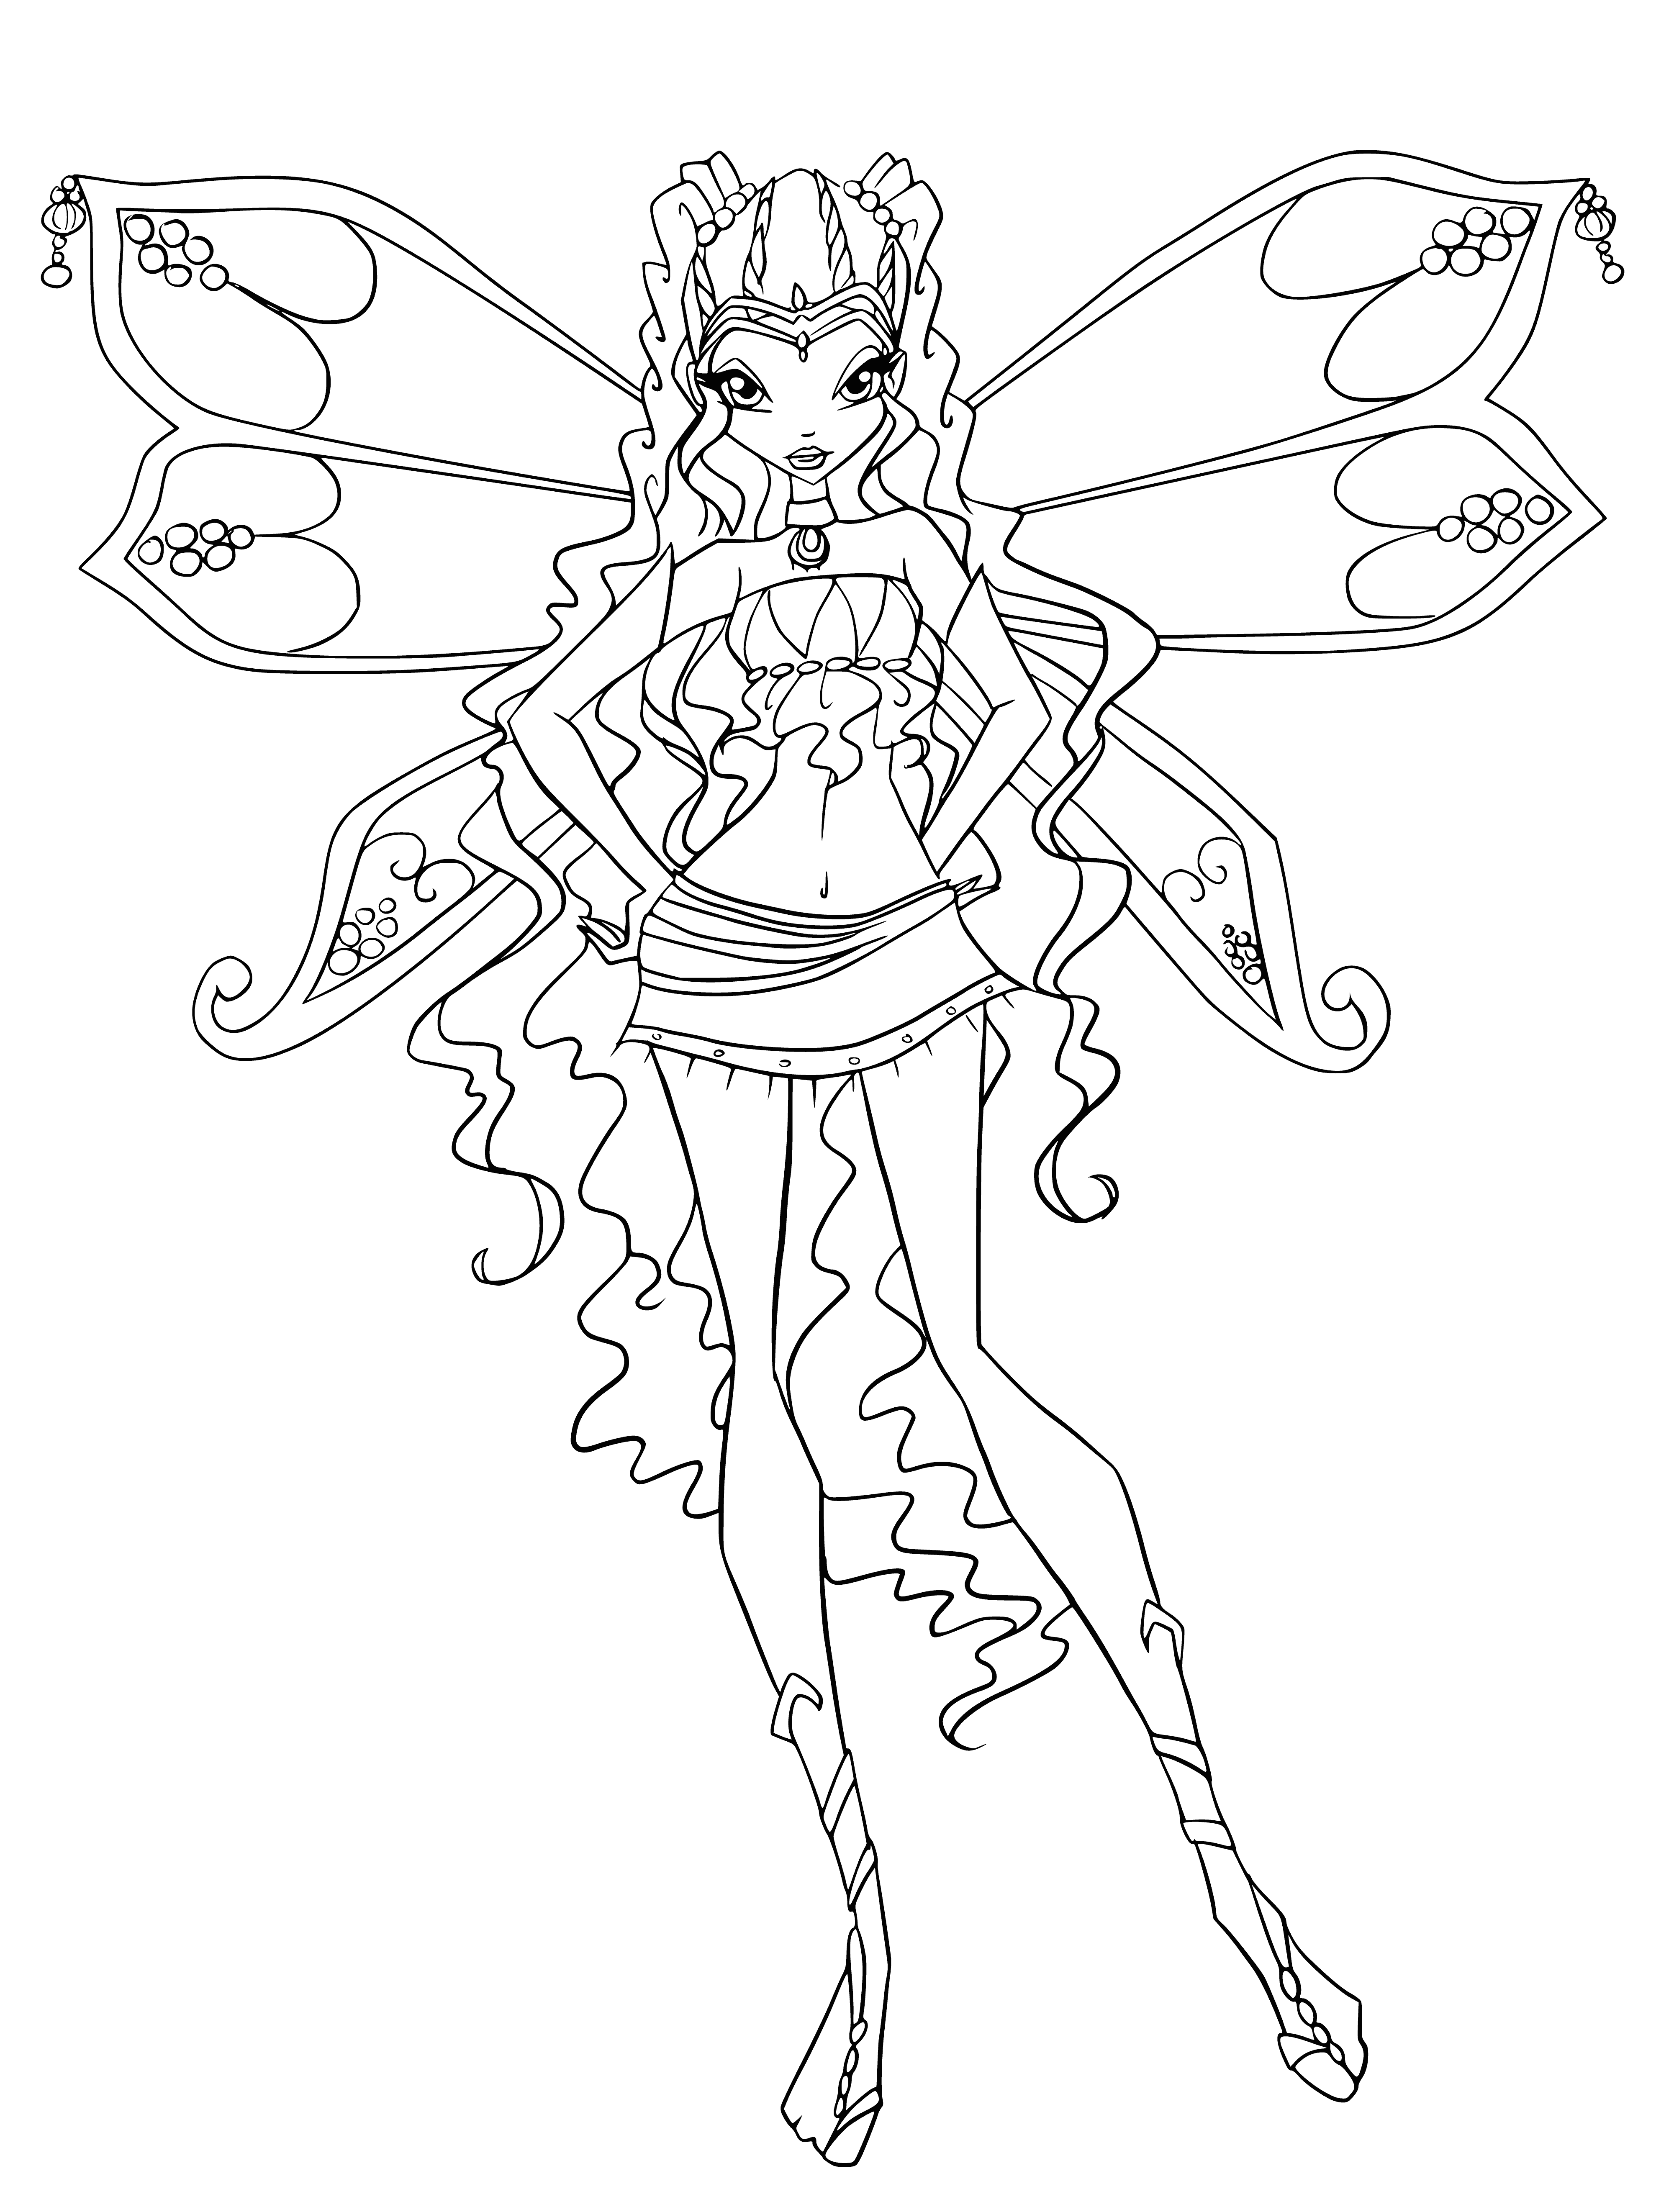 coloring page: Leila is a small girl with light skin, wavy brown hair, pink dress, white undershirt, brown boots, and pink bow. She's kind, carrying a brown staff.